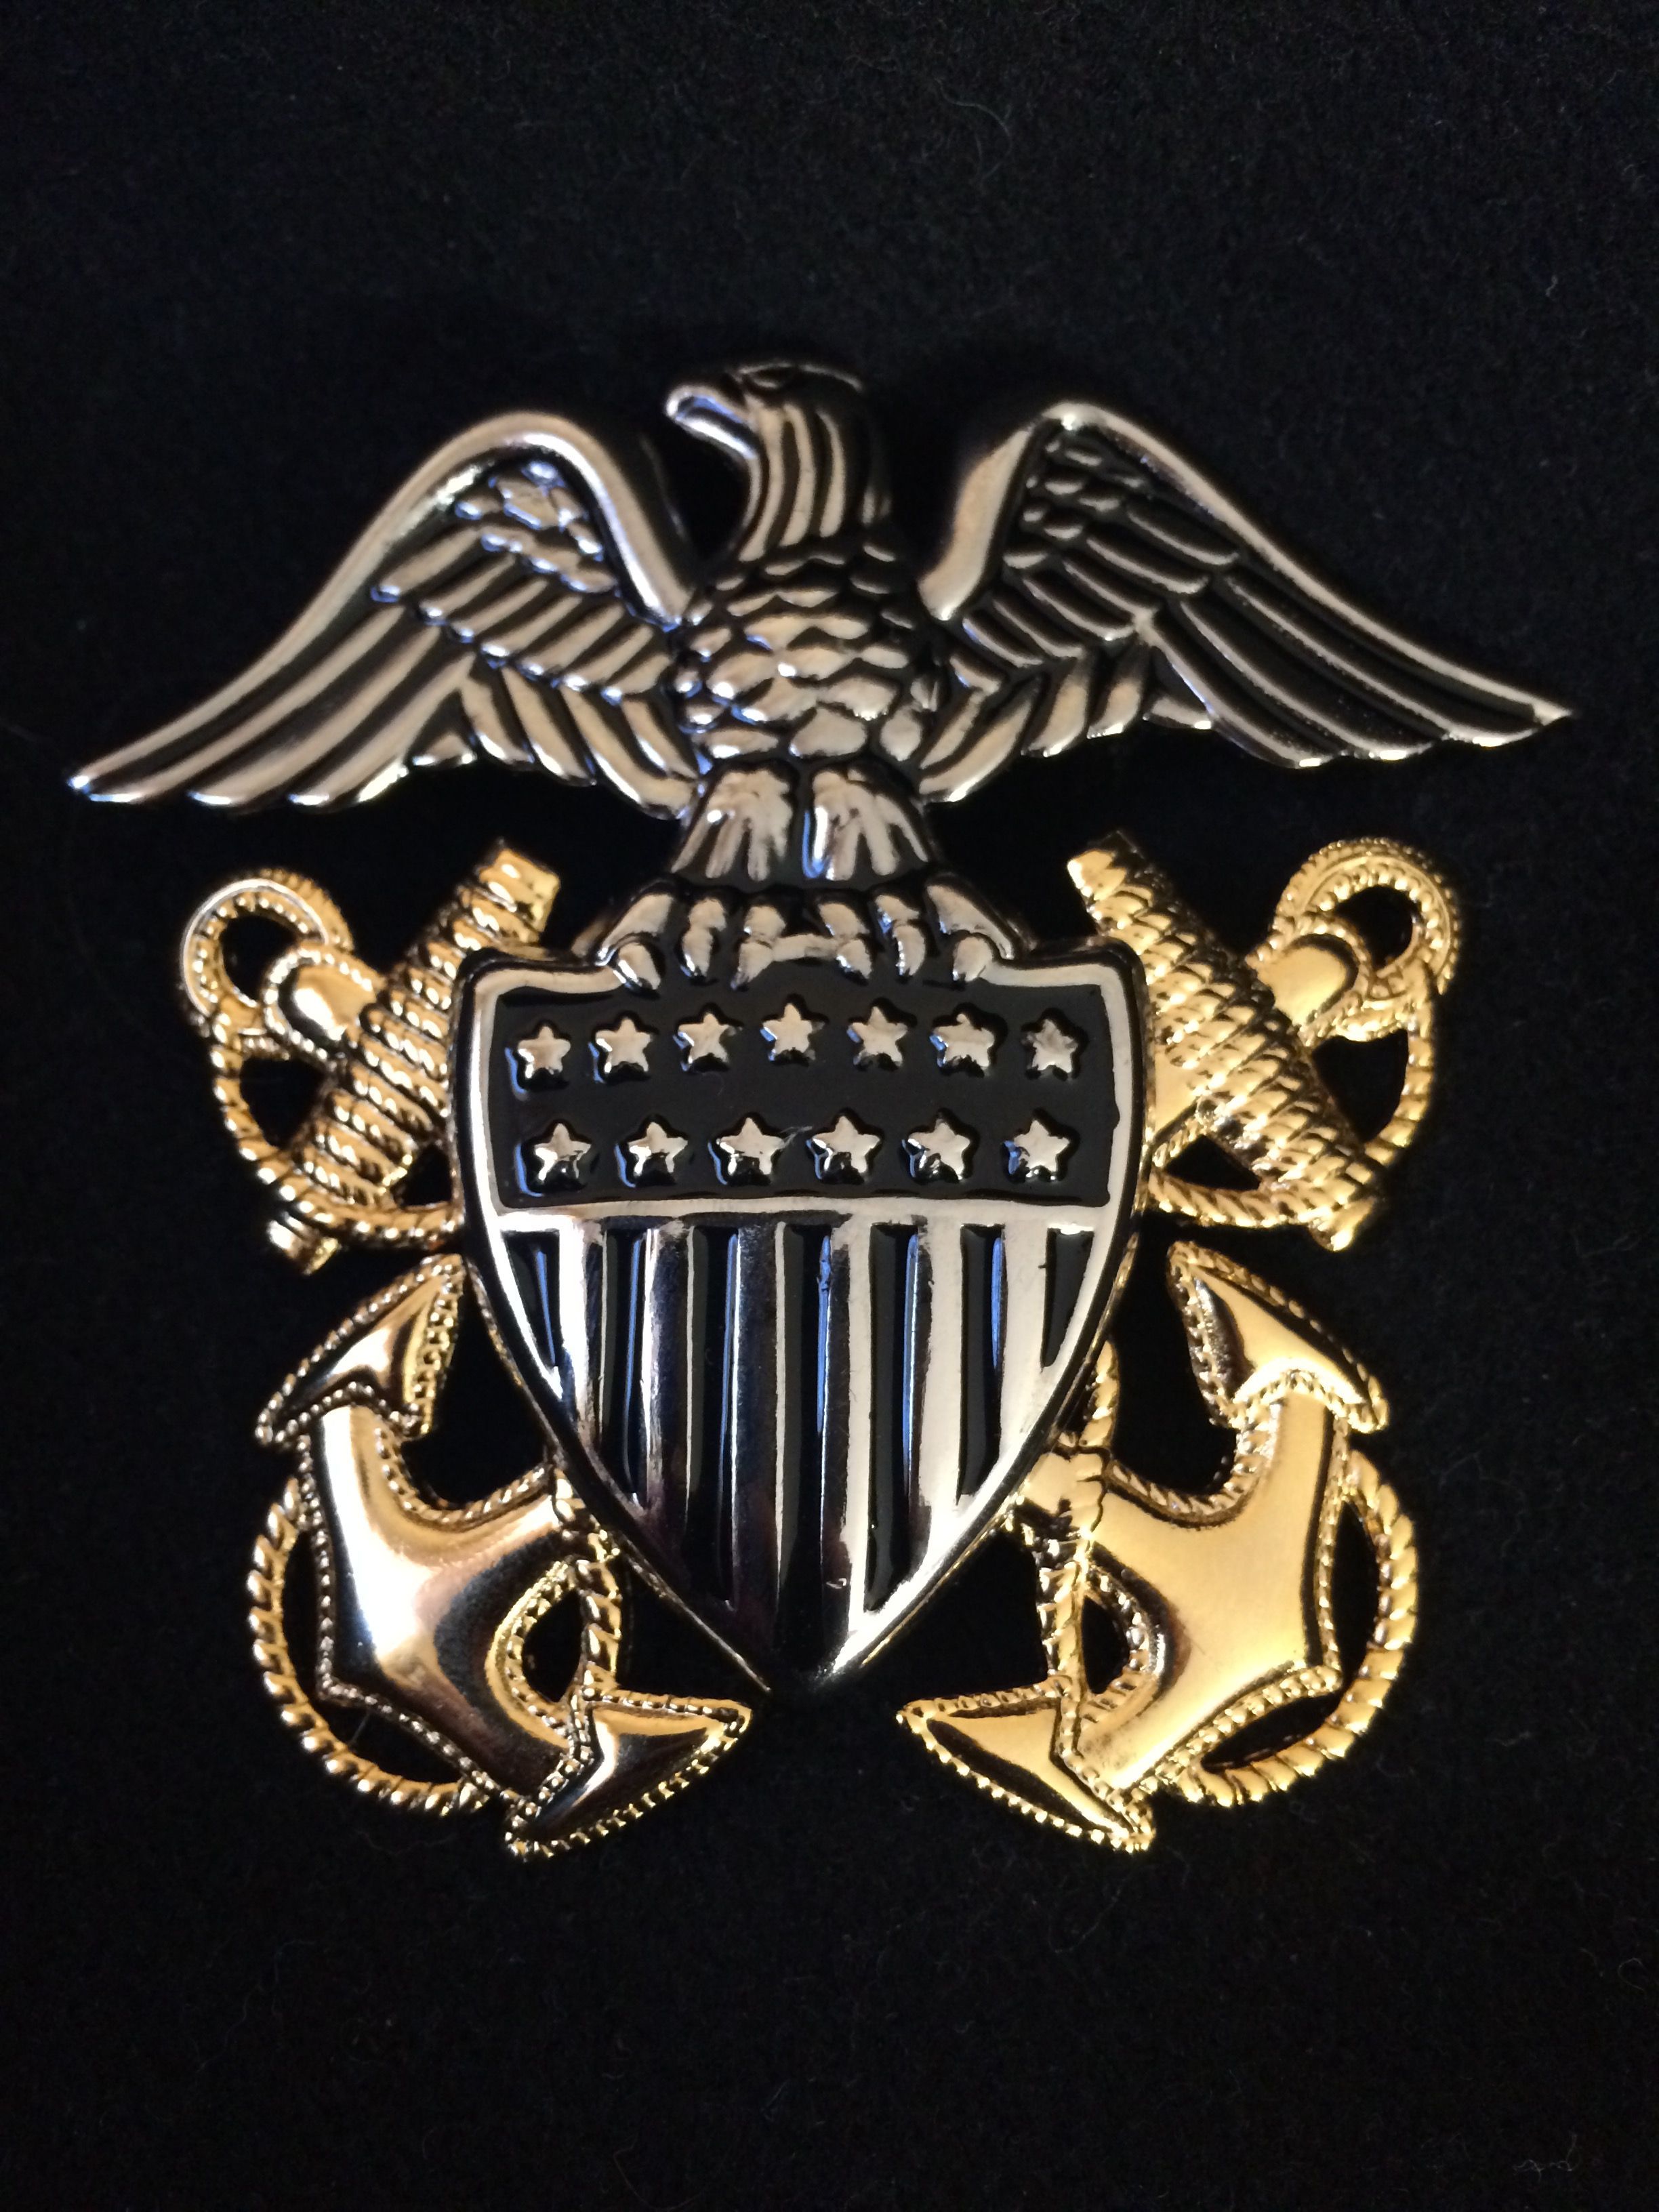 Commissioned Officer Crest, U.S. Navy. Navy diver, Military insignia, Navy